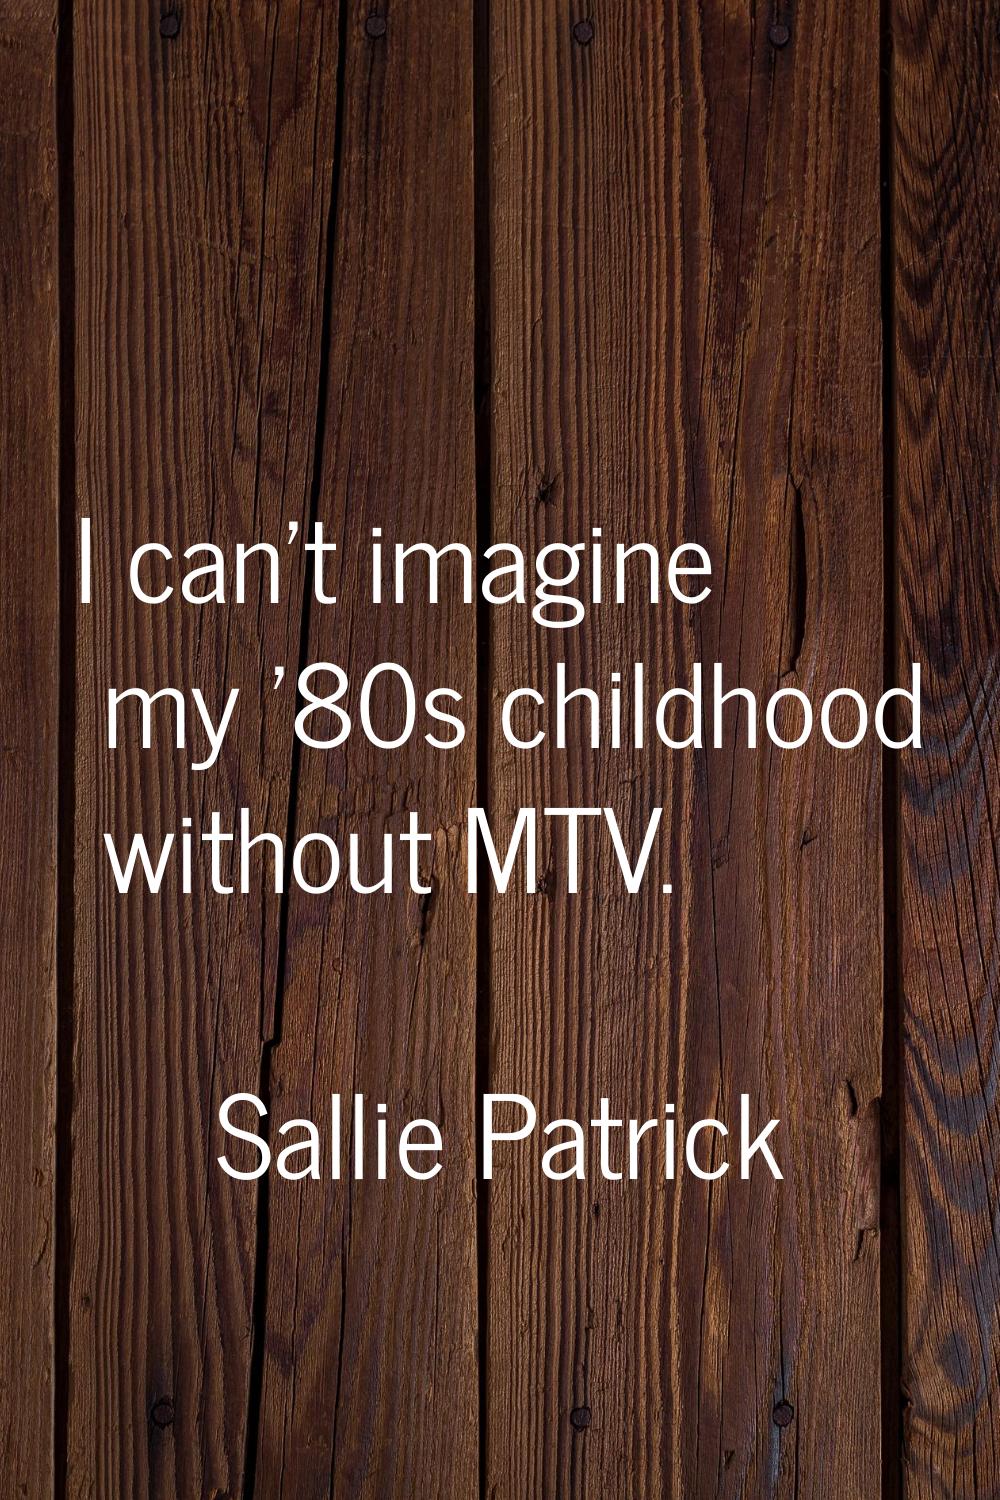 I can't imagine my '80s childhood without MTV.